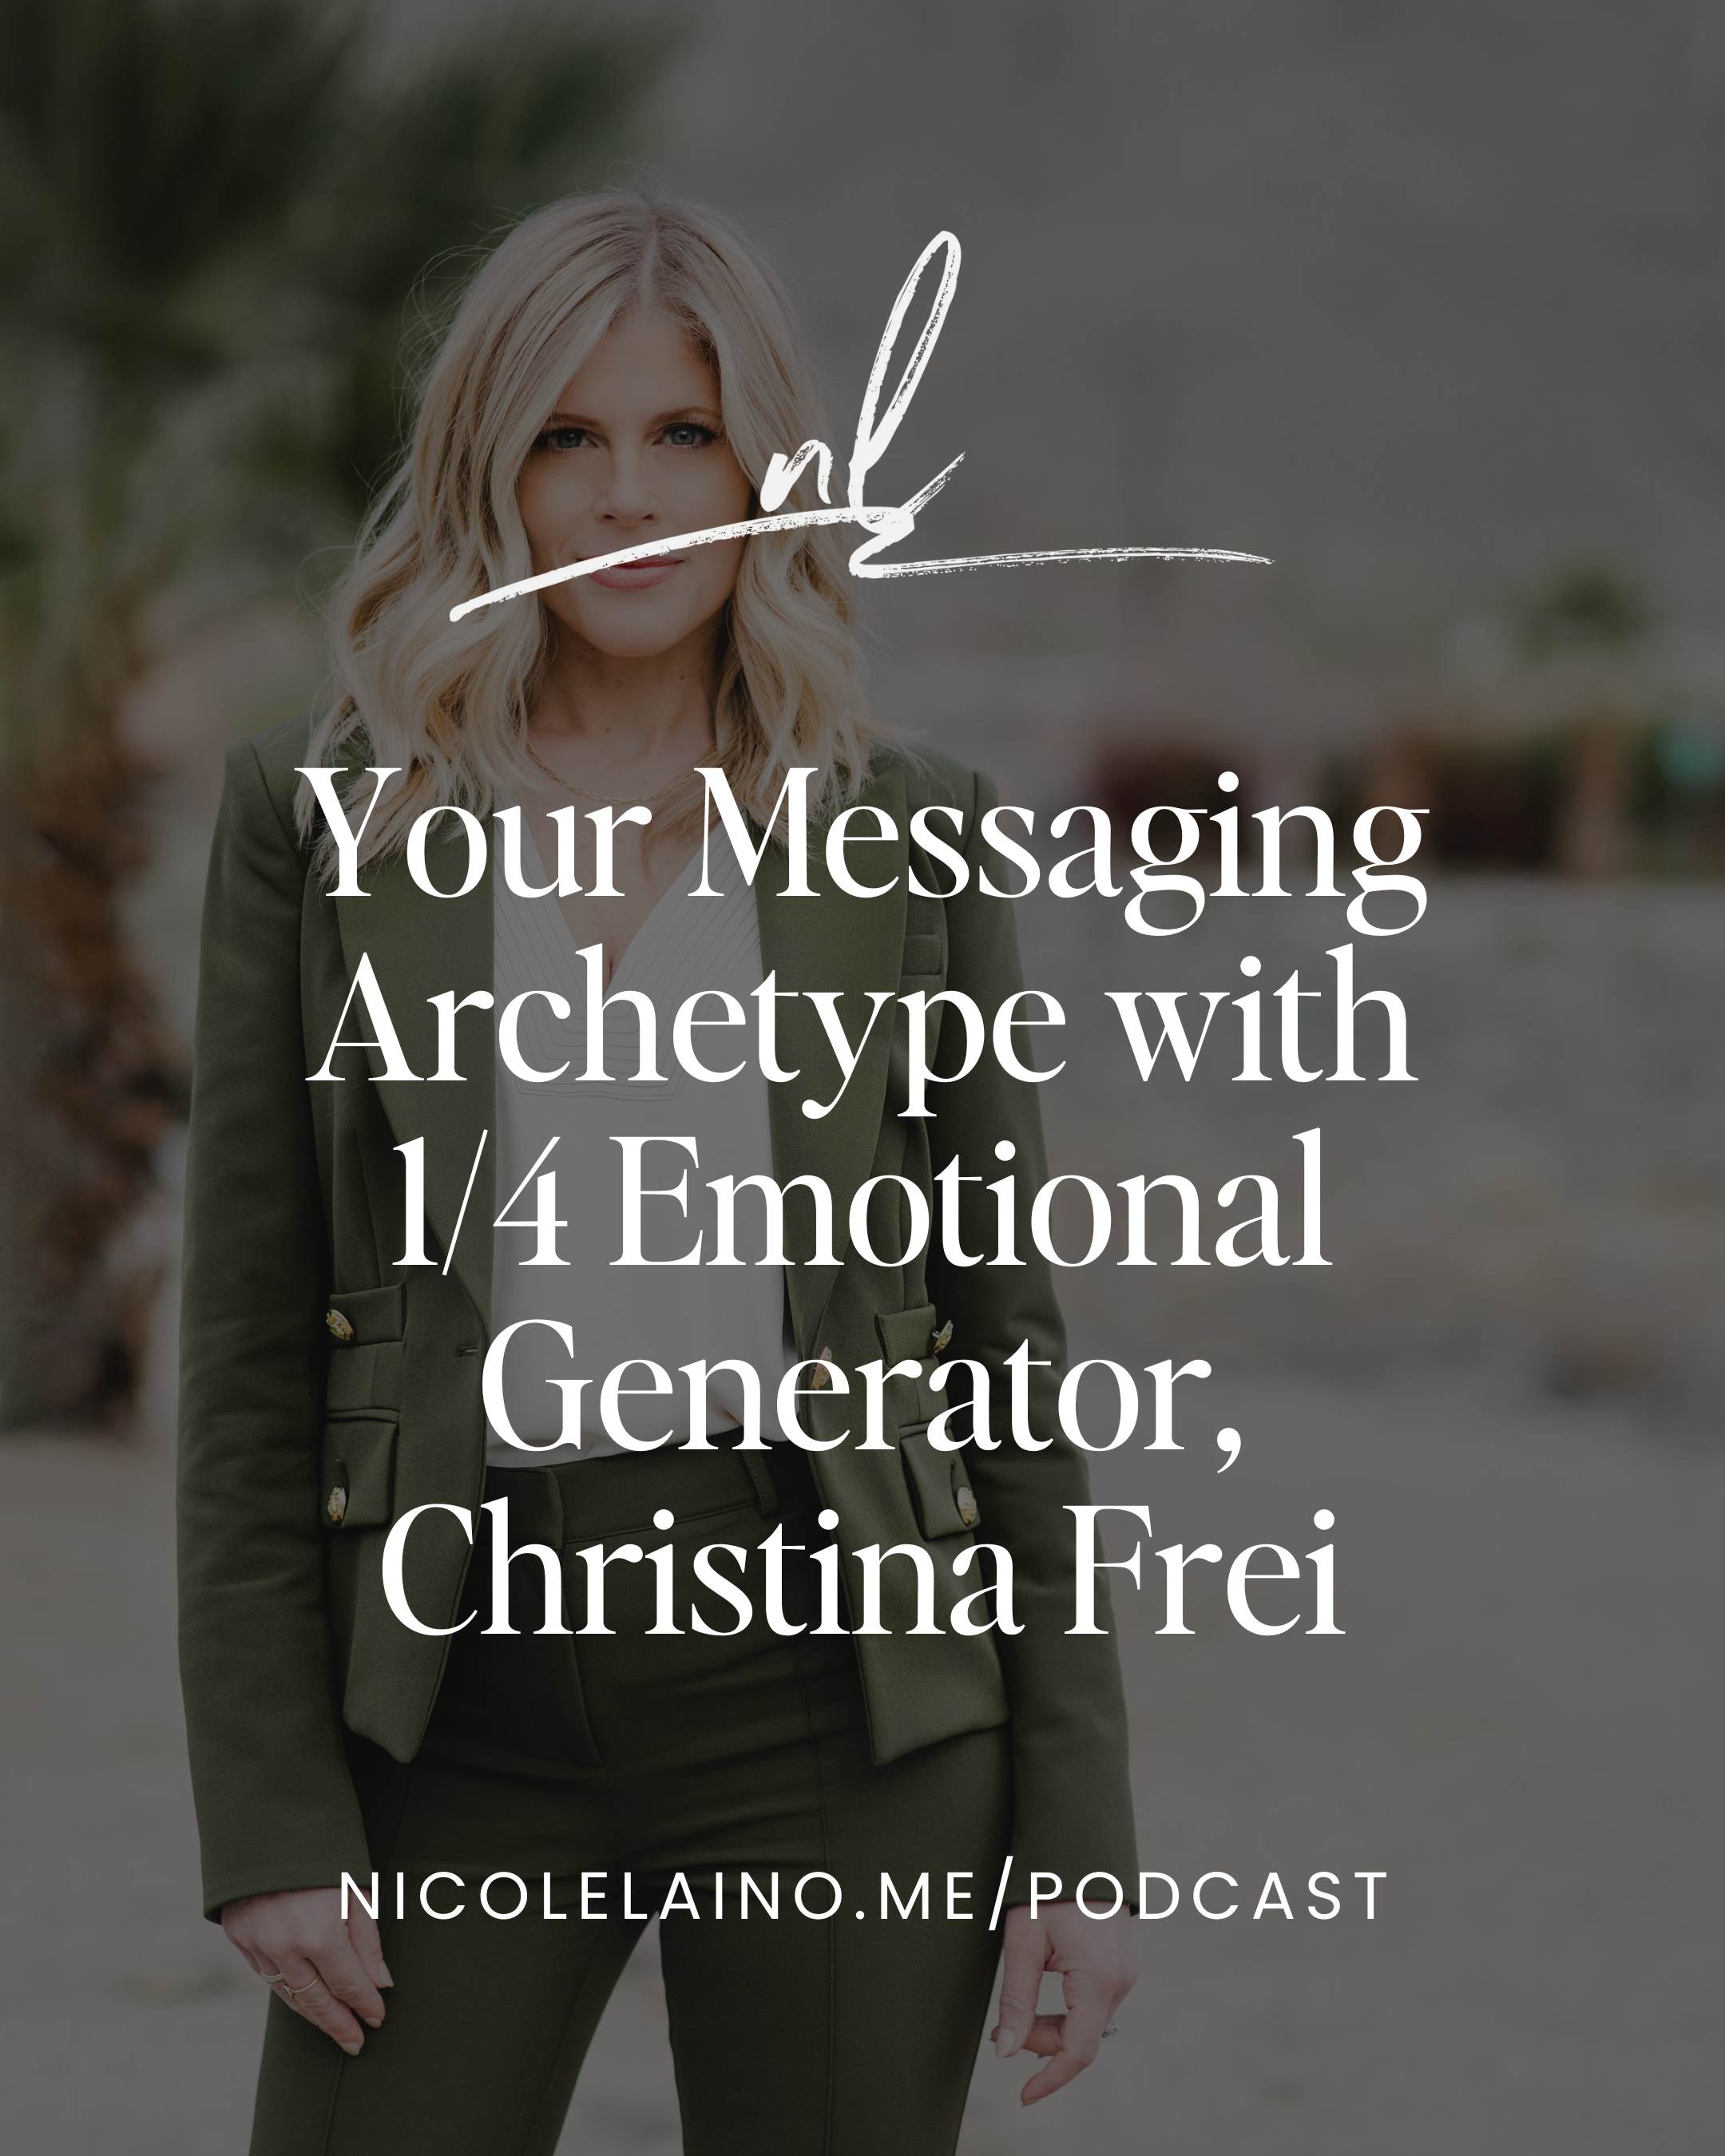 Your Messaging Archetype with 1/4 Emotional Generator, Christina Frei